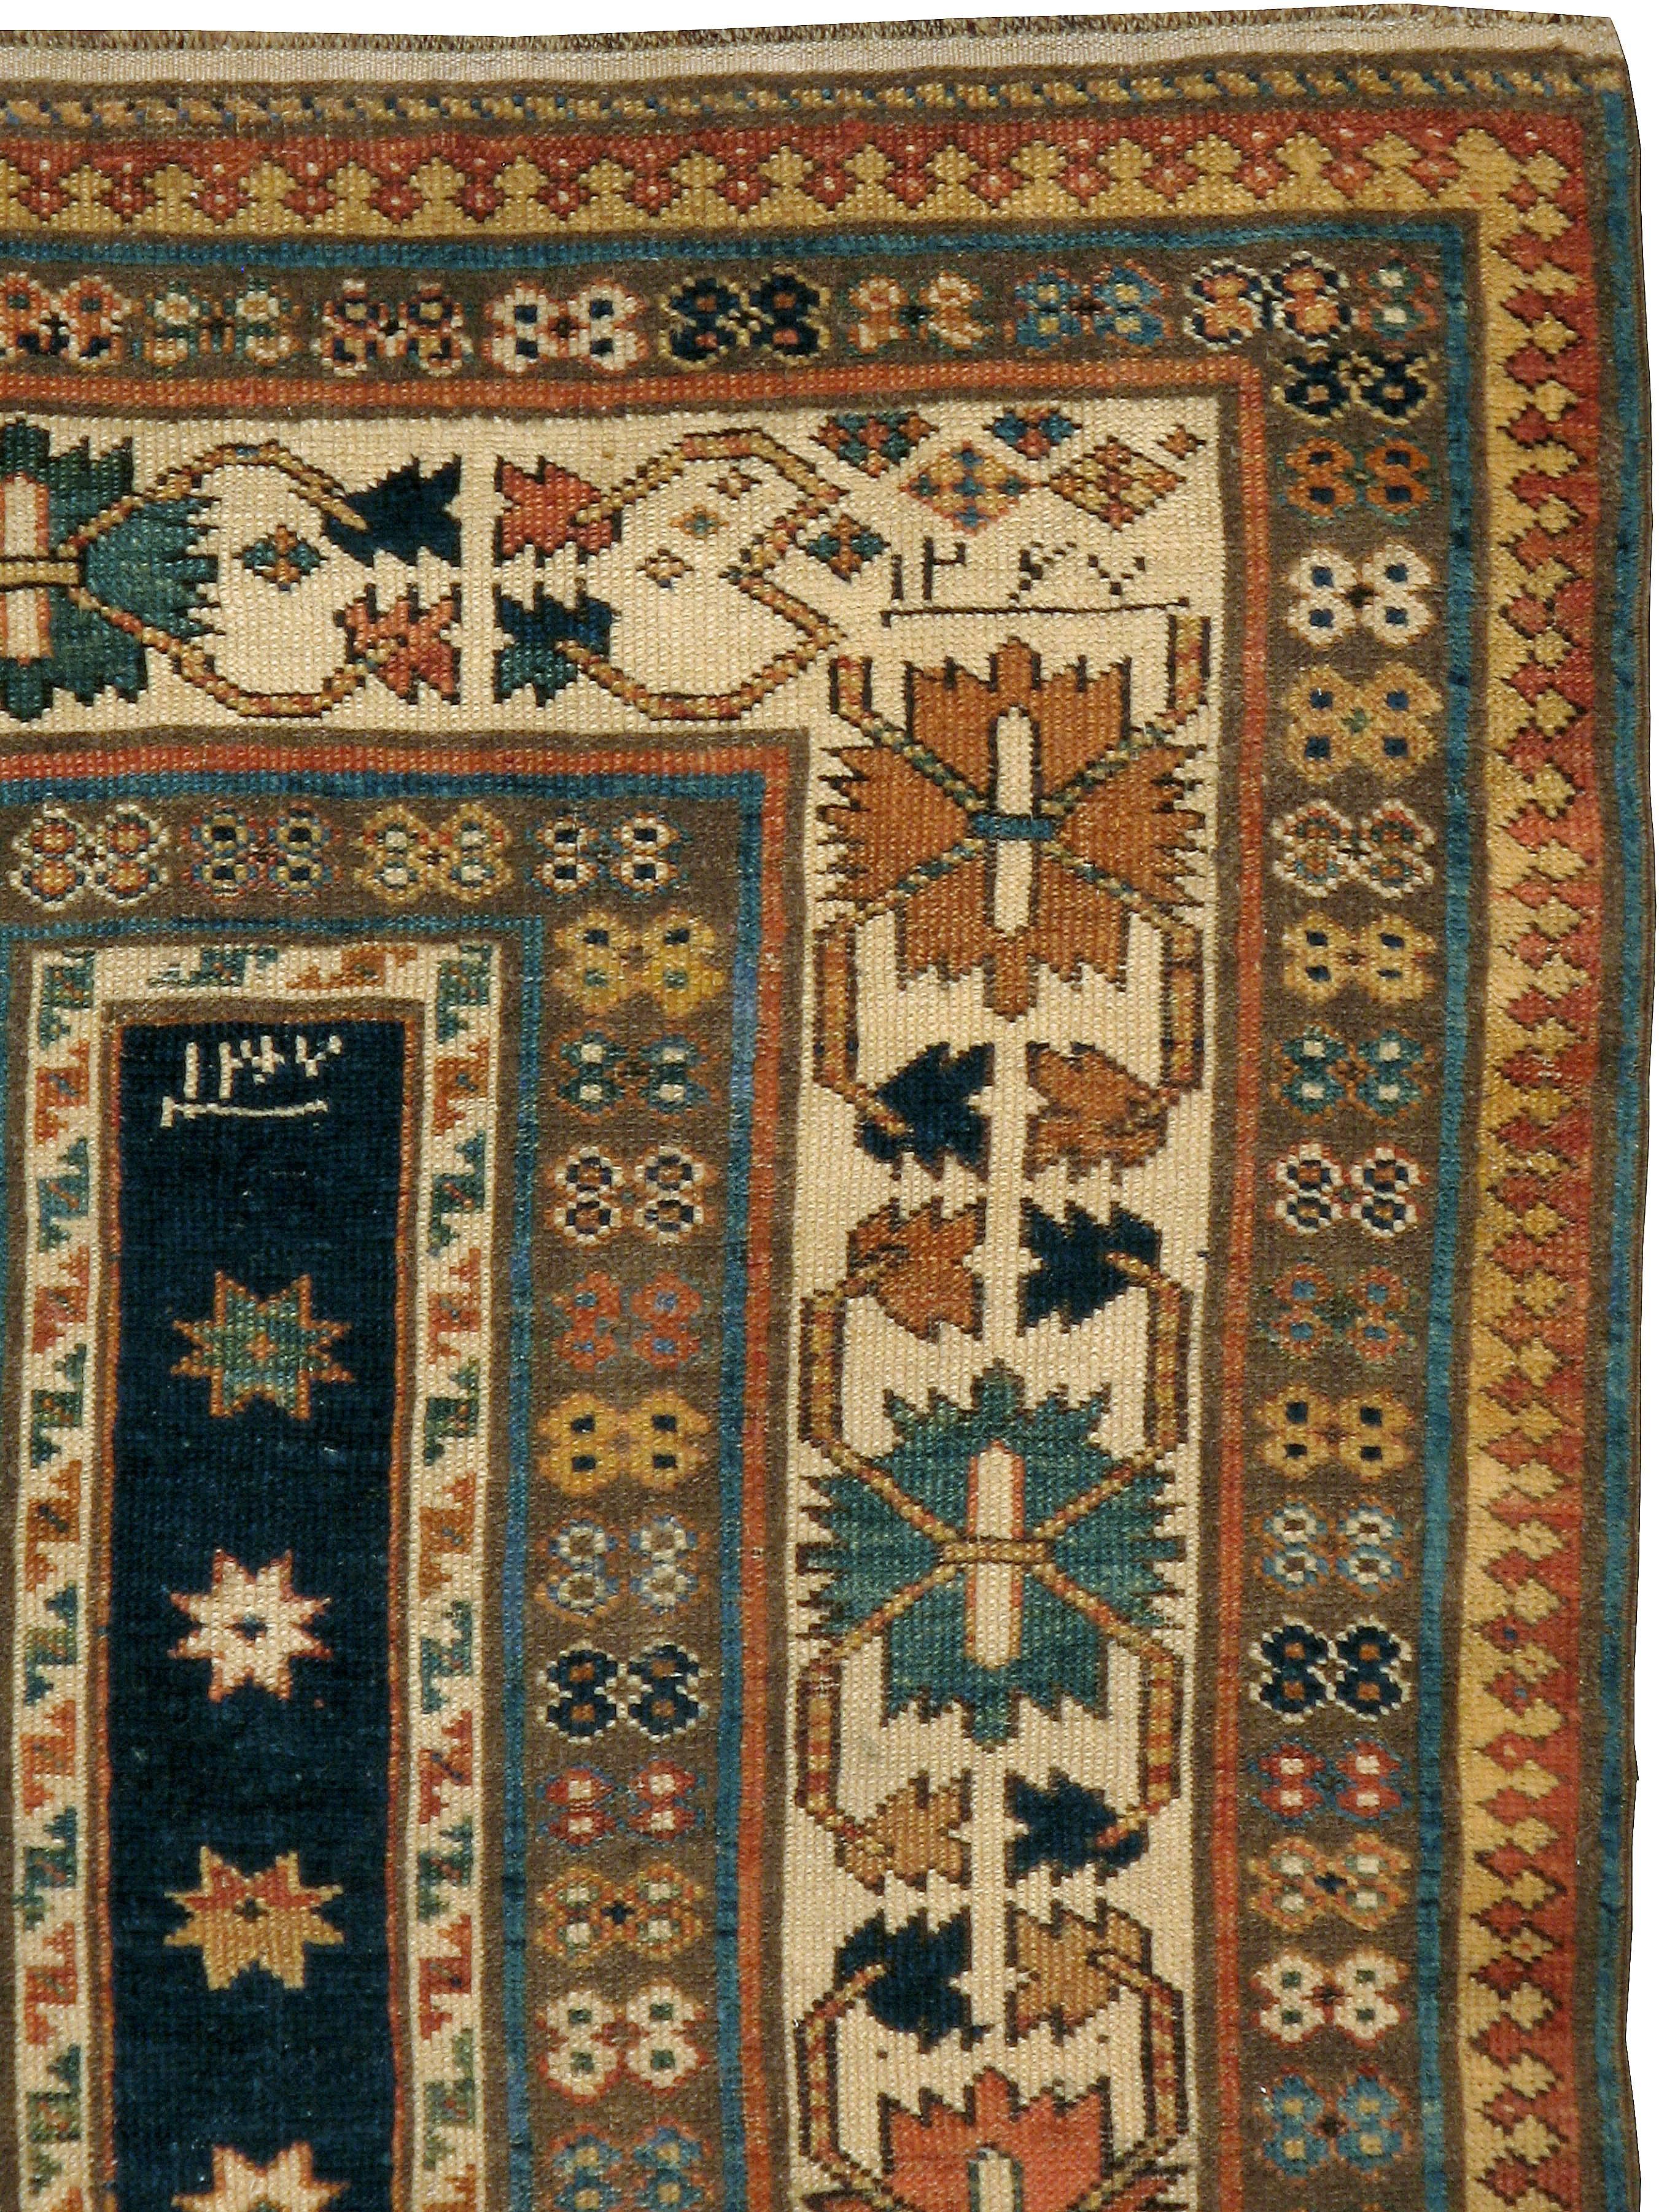 An antique Caucasian carpet from the late 19th century.